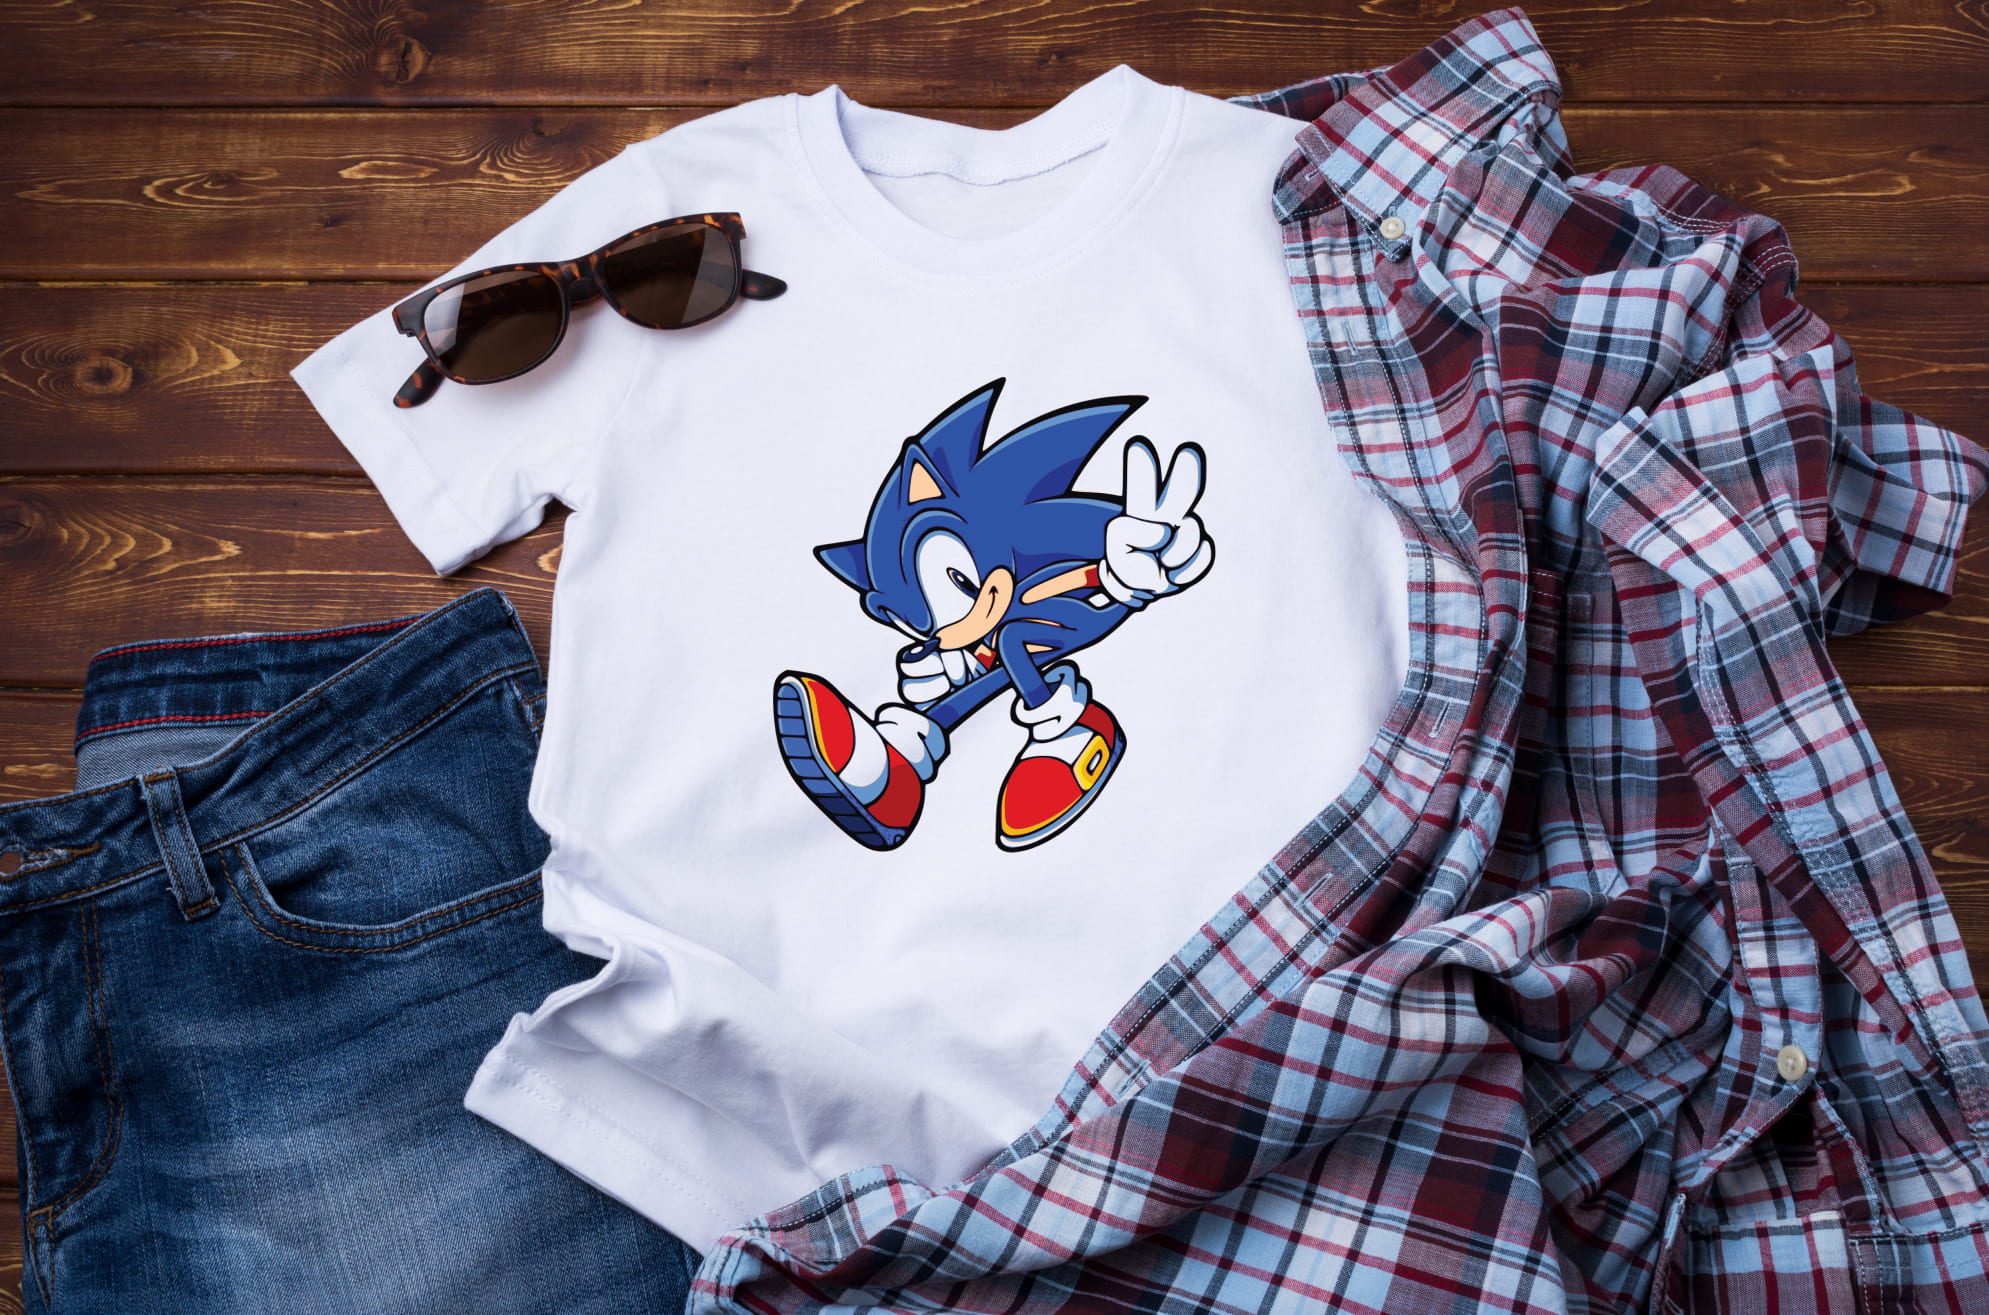 This Sonic wants to dance.